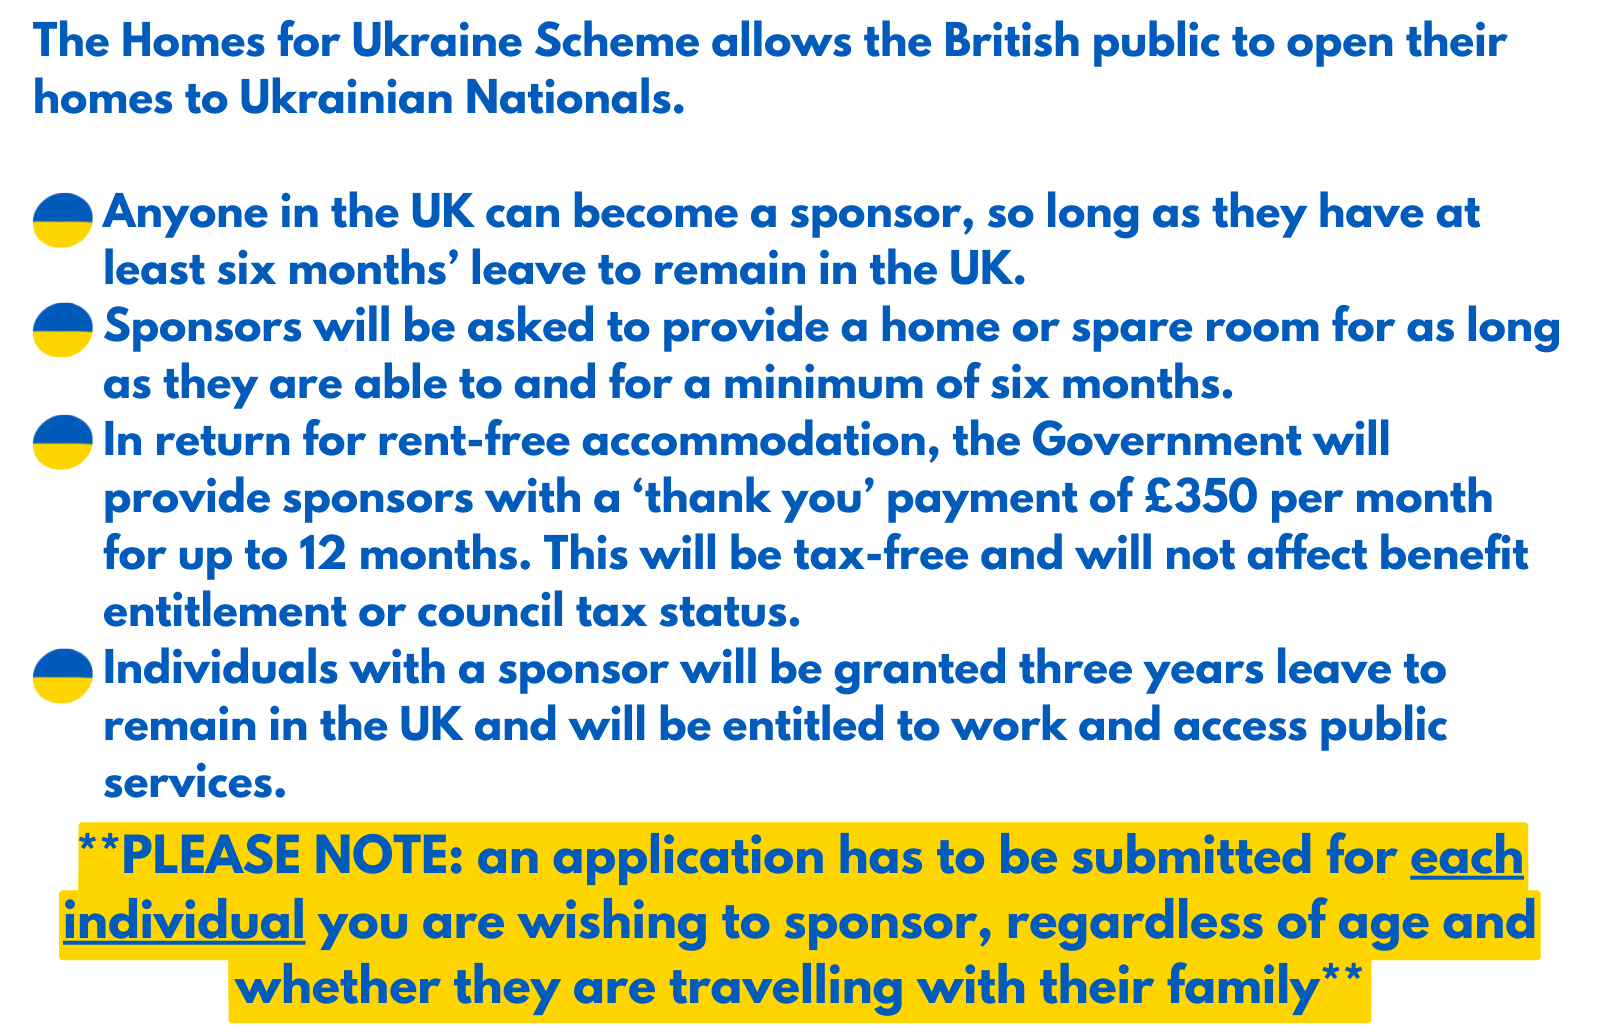 The Homes for Ukraine Scheme allows the British public to open their homes to Ukrainian Nationals.   Anyone in the UK can become a sponsor, so long as they have at least six months’ leave to remain in the UK. Sponsors will be asked to provide a home or spare room for as long as they are able to and for a minimum of six months.  In return for rent-free accommodation, the Government will provide sponsors with a ‘thank you’ payment of £350 per month for up to 12 months. This will be tax-free and will not affect benefit entitlement or council tax status. Individuals with a sponsor will be granted three years leave to remain in the UK and will be entitled to work and access public services.**PLEASE NOTE: an application has to be submitted for each individual you are wishing to sponsor, regardless of age and whether they are travelling with their family**